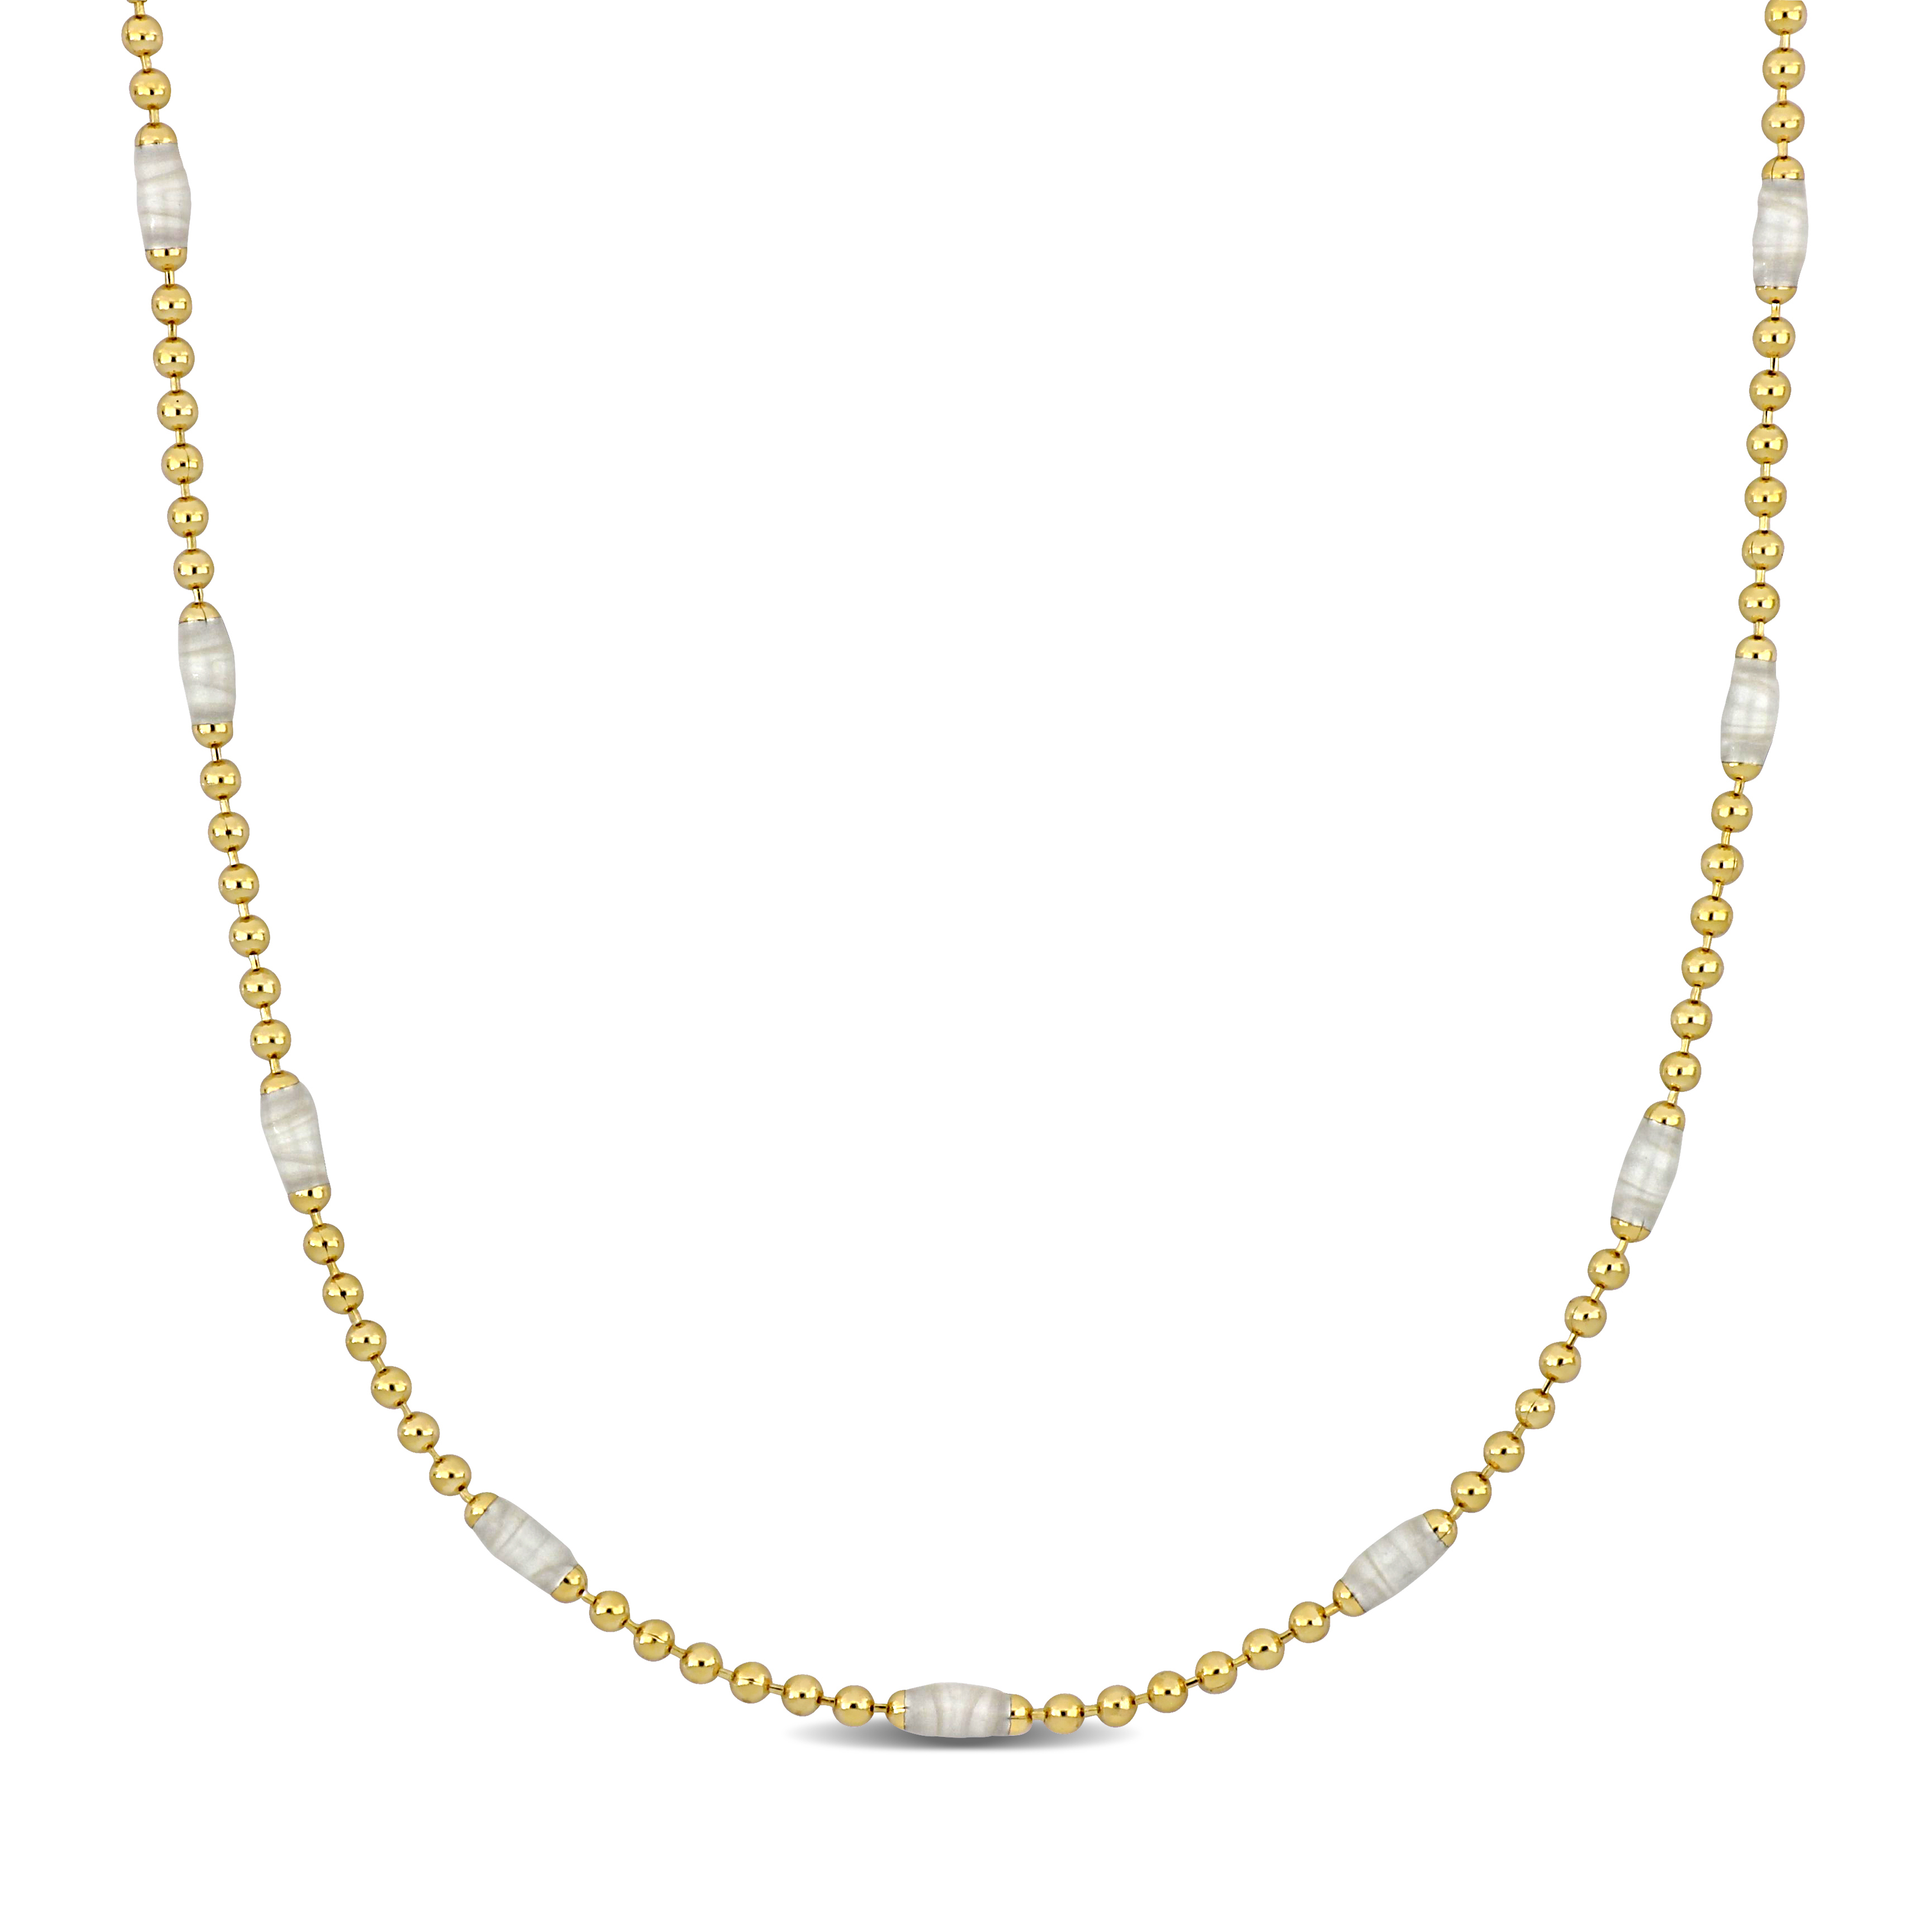 Ball Link Necklace with White Enamel in Yellow Plated Sterling Silver - 15+2 in.